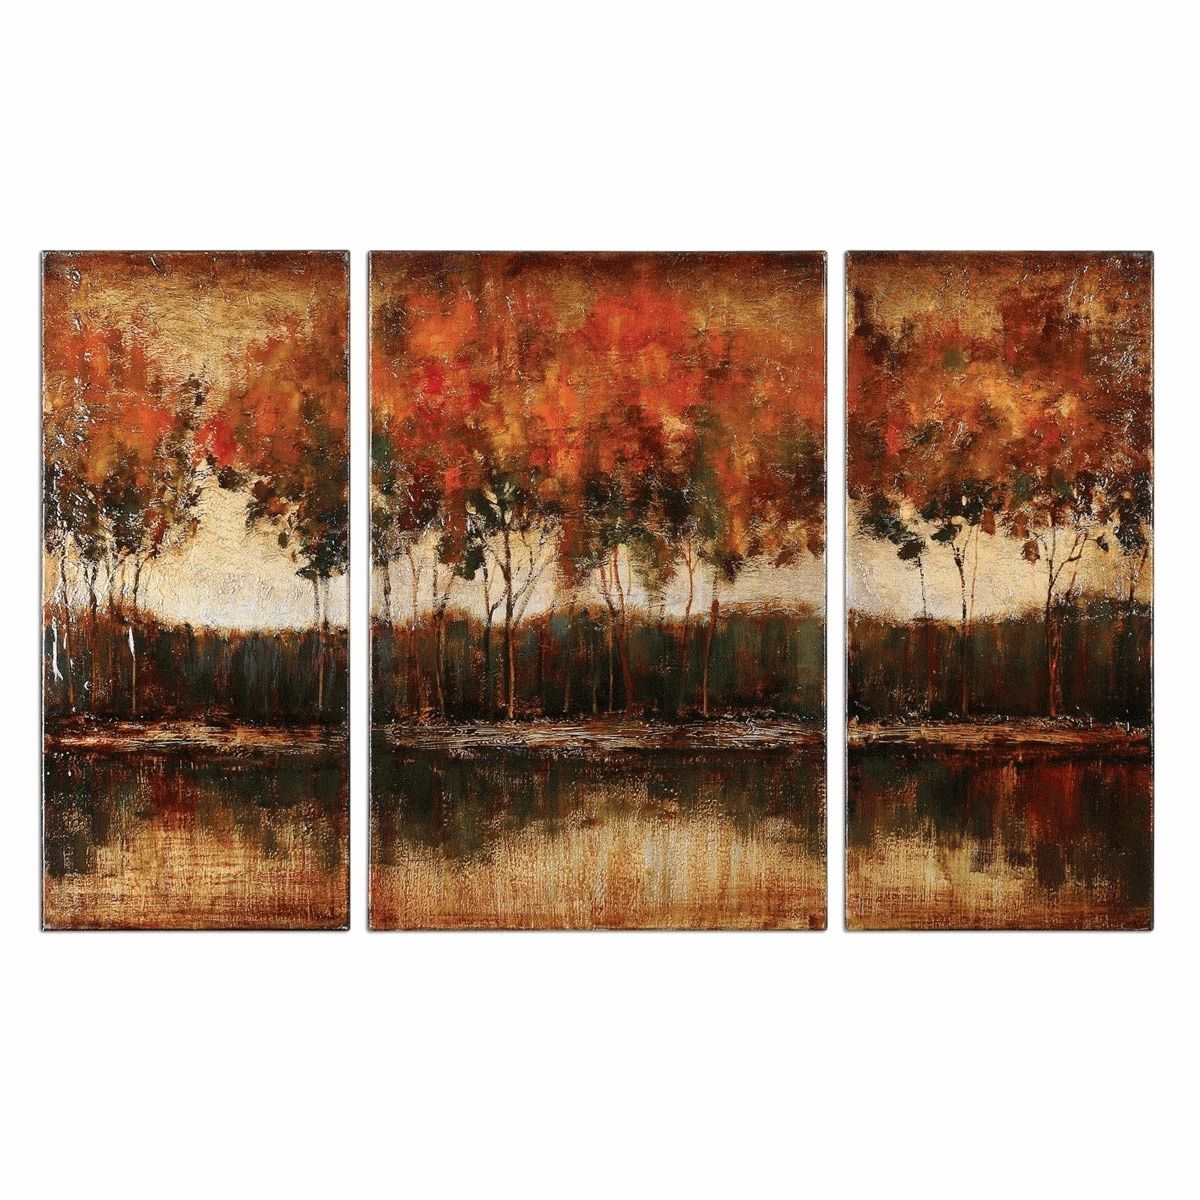 Trilakes Canvas Wall Art – Set Of 3 Regarding Newest Cheap Wall Art Sets (View 17 of 20)